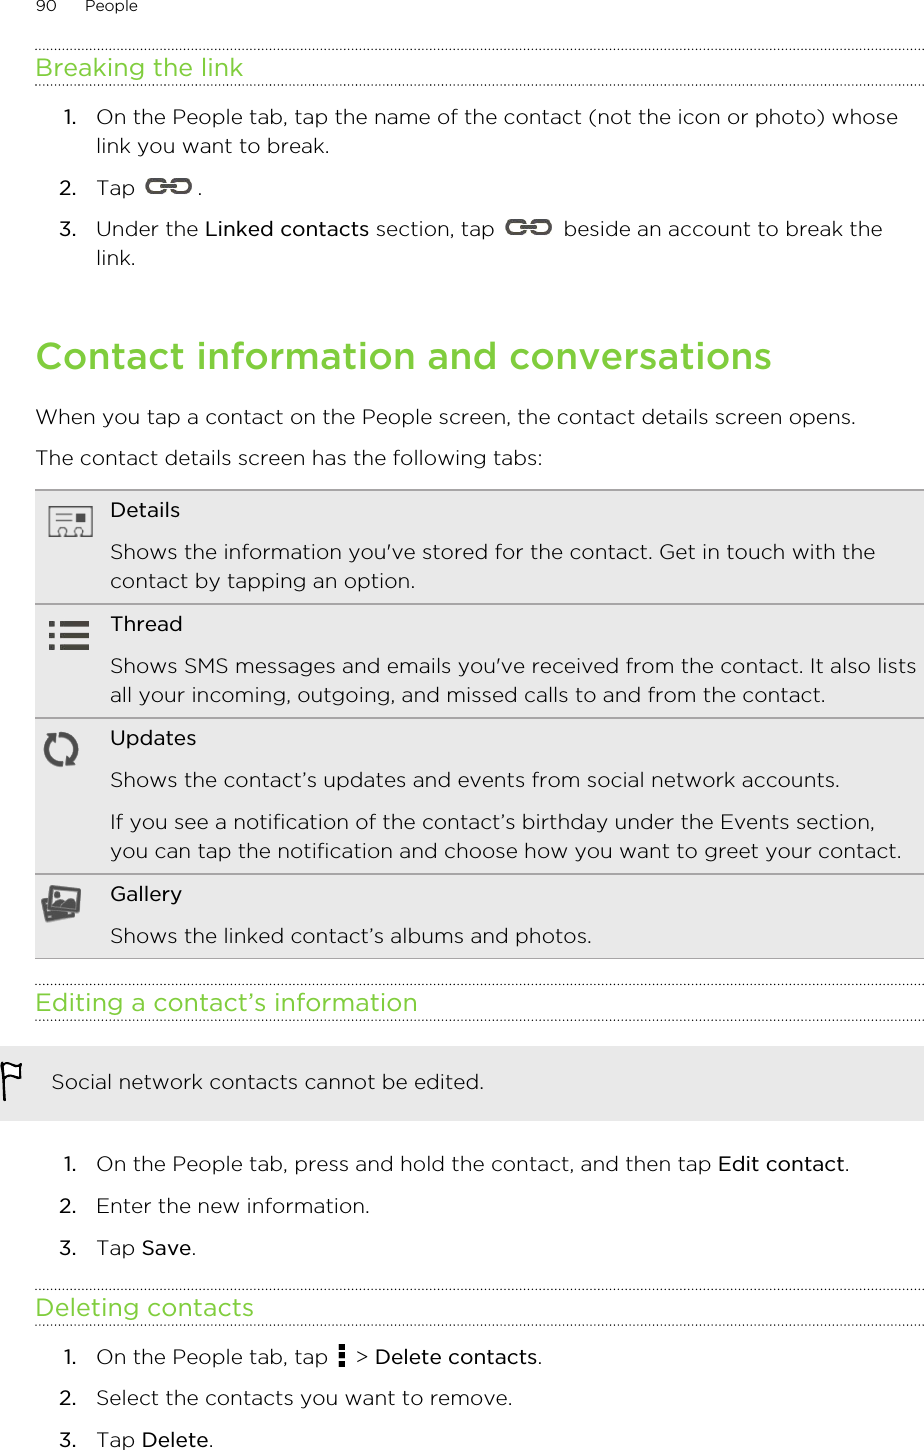 Breaking the link1. On the People tab, tap the name of the contact (not the icon or photo) whoselink you want to break.2. Tap  .3. Under the Linked contacts section, tap   beside an account to break thelink.Contact information and conversationsWhen you tap a contact on the People screen, the contact details screen opens.The contact details screen has the following tabs:DetailsShows the information you&apos;ve stored for the contact. Get in touch with thecontact by tapping an option.ThreadShows SMS messages and emails you&apos;ve received from the contact. It also listsall your incoming, outgoing, and missed calls to and from the contact.UpdatesShows the contact’s updates and events from social network accounts.If you see a notification of the contact’s birthday under the Events section,you can tap the notification and choose how you want to greet your contact.GalleryShows the linked contact’s albums and photos.Editing a contact’s informationSocial network contacts cannot be edited.1. On the People tab, press and hold the contact, and then tap Edit contact.2. Enter the new information.3. Tap Save.Deleting contacts1. On the People tab, tap   &gt; Delete contacts.2. Select the contacts you want to remove.3. Tap Delete.90 People